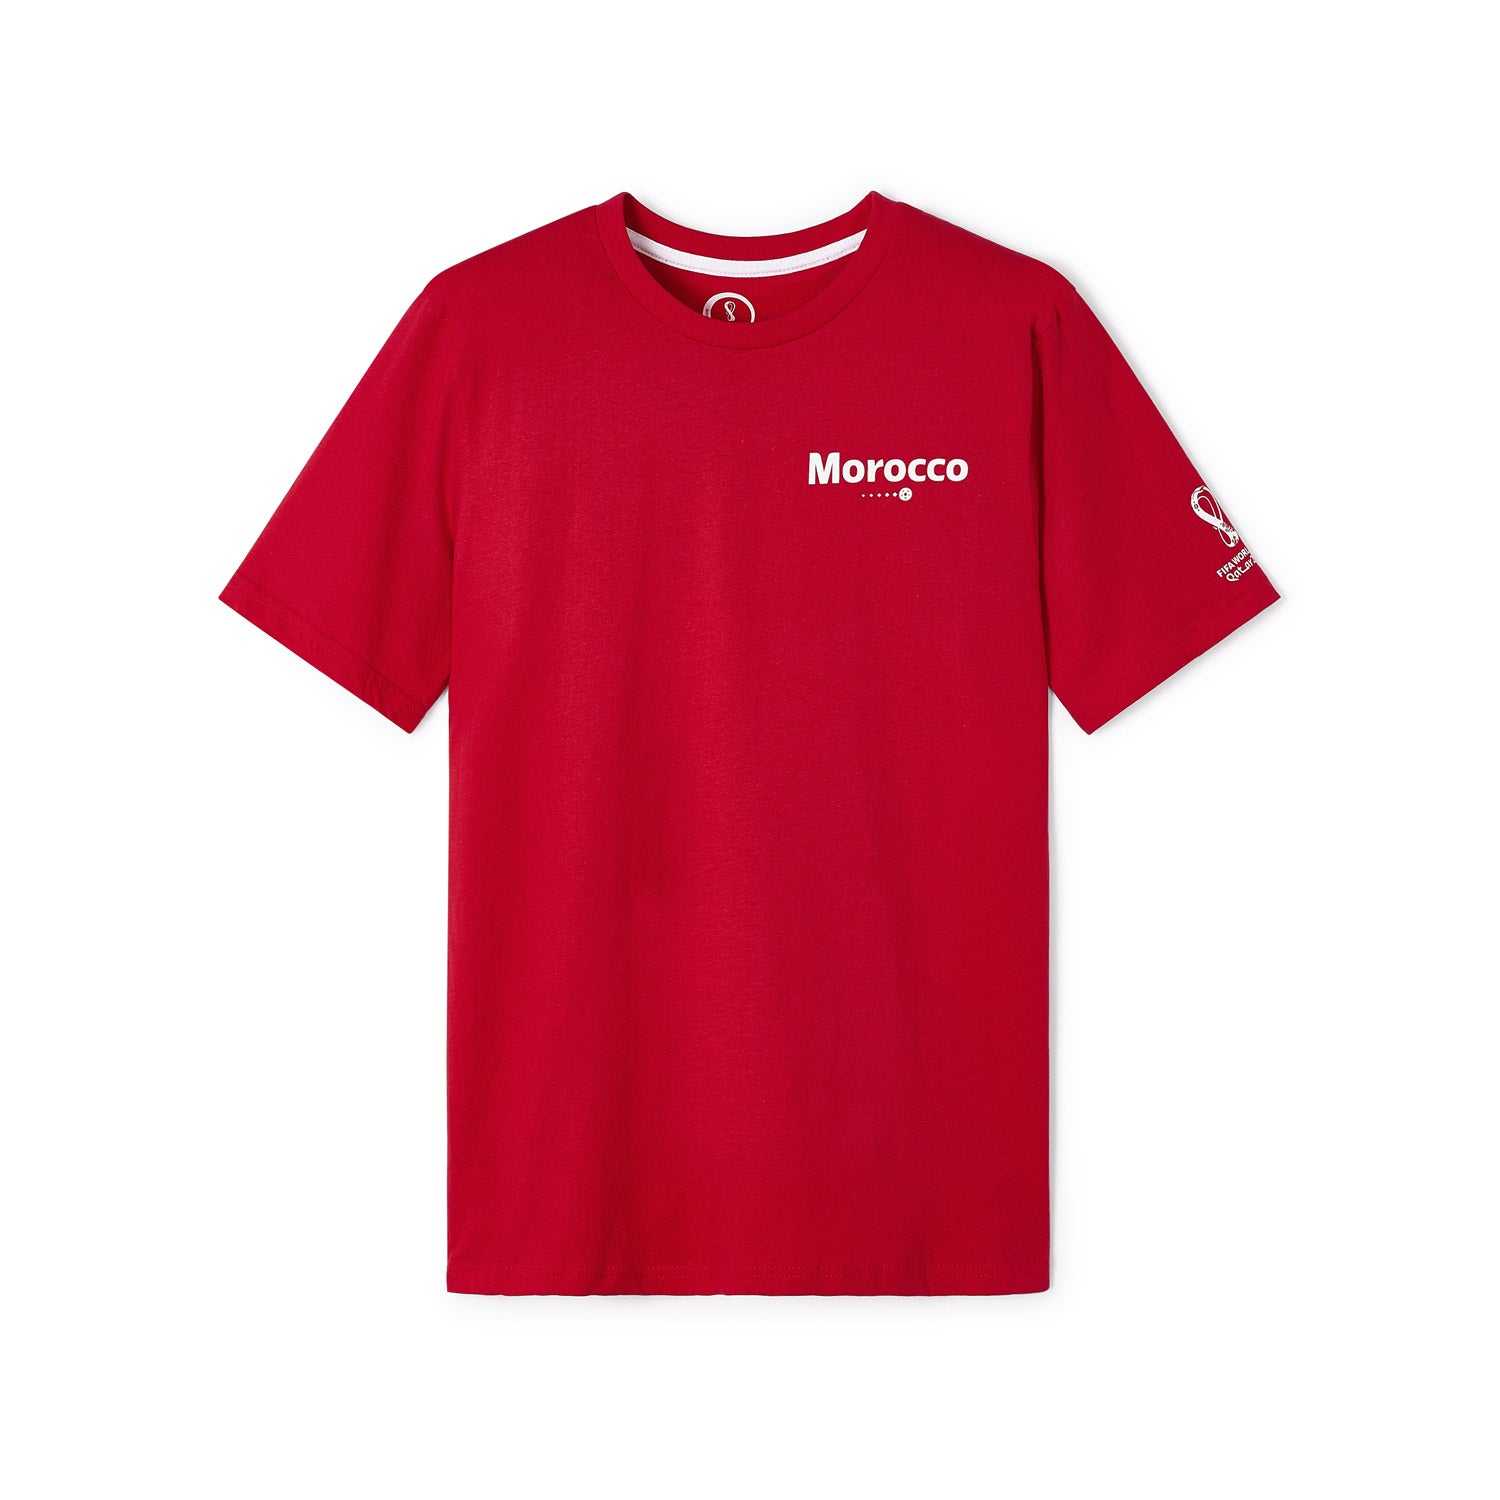 2022 World Cup Morocco Red T-Shirt - Mens